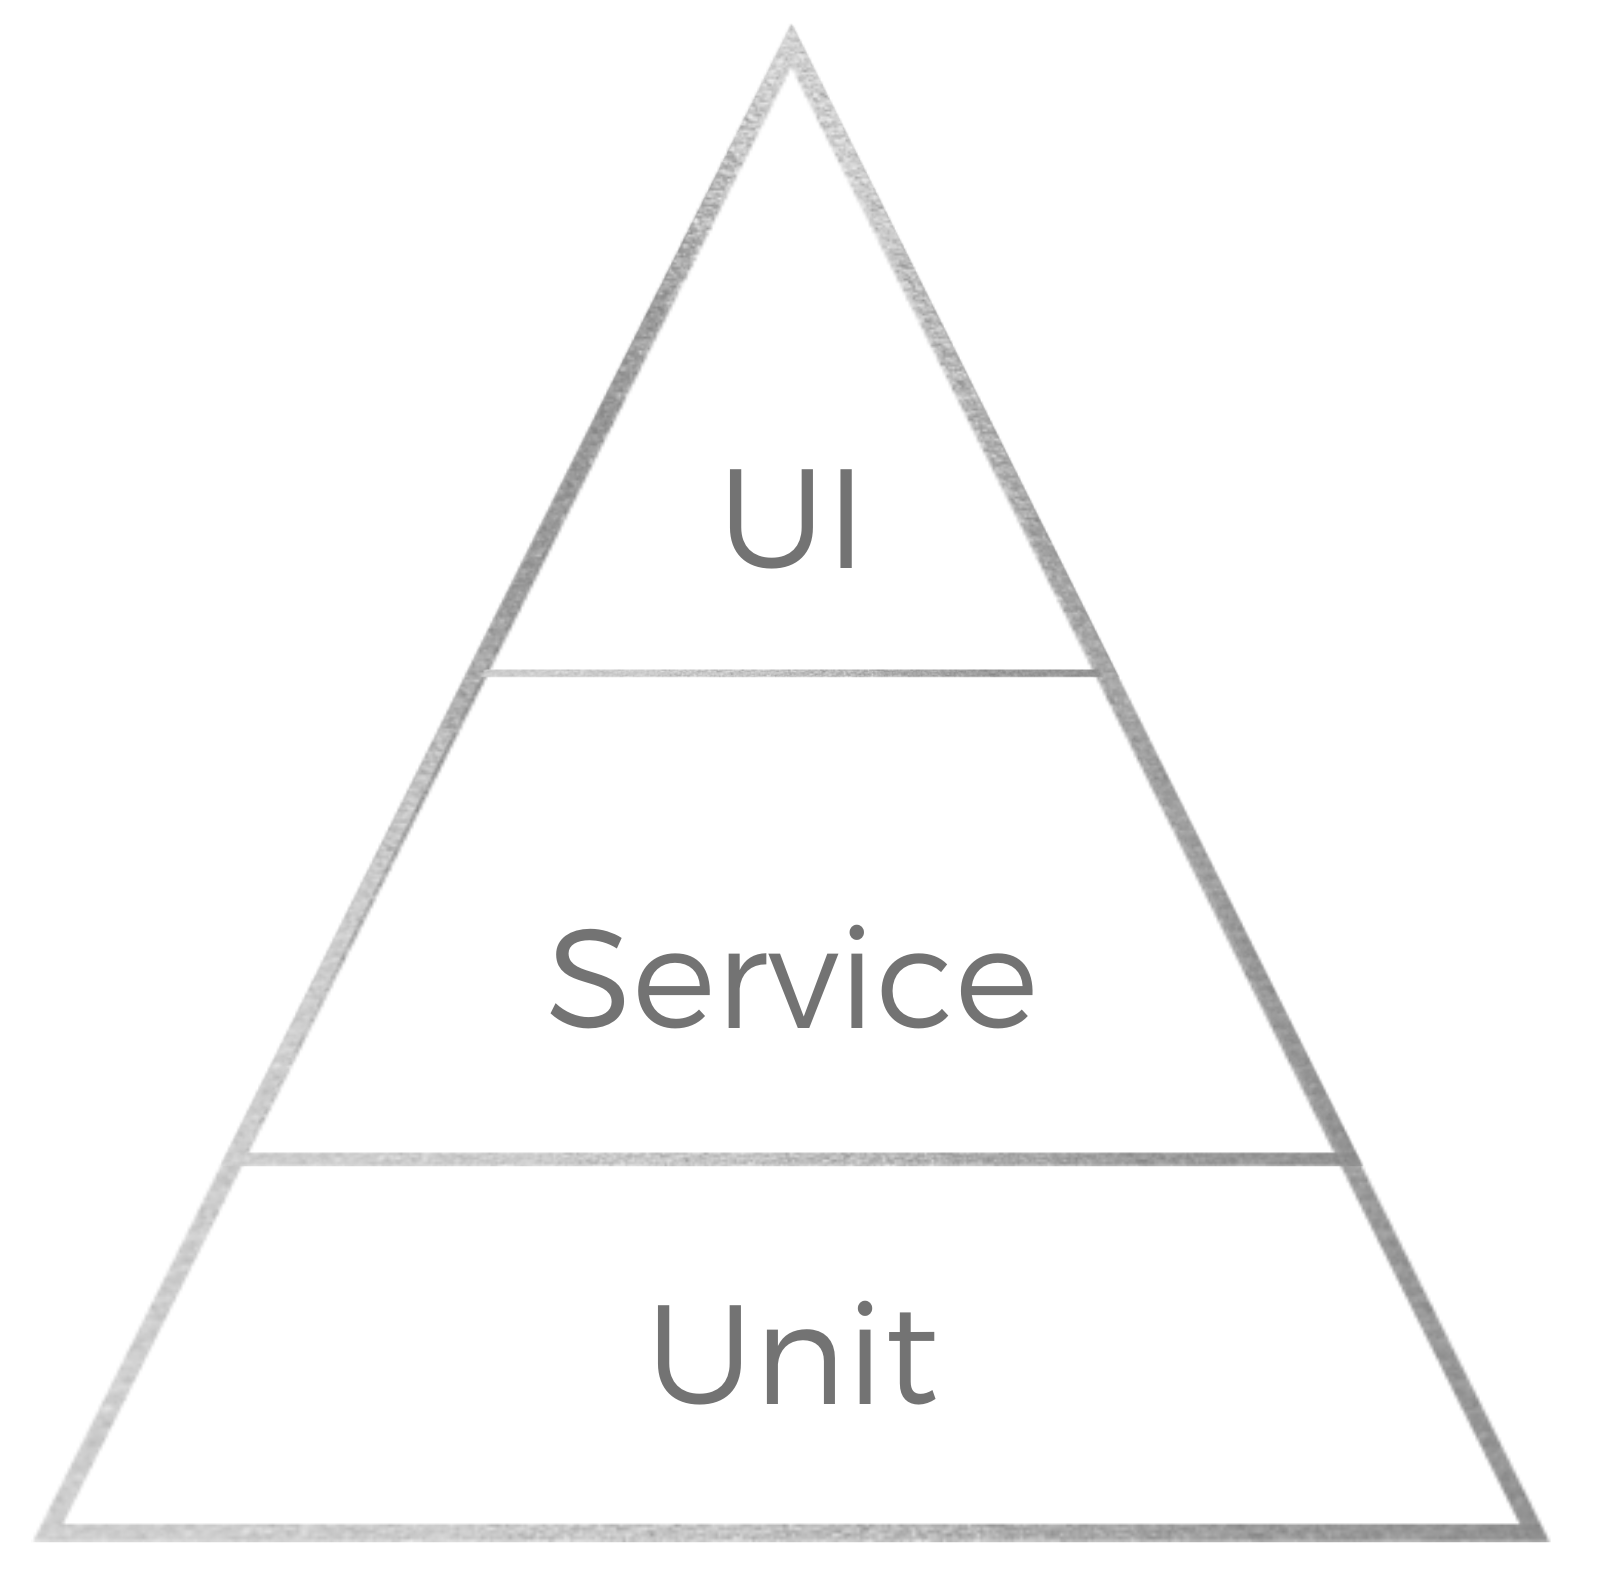 Testing Pyramid. The largest number of tests should be unit, then service, then UI.